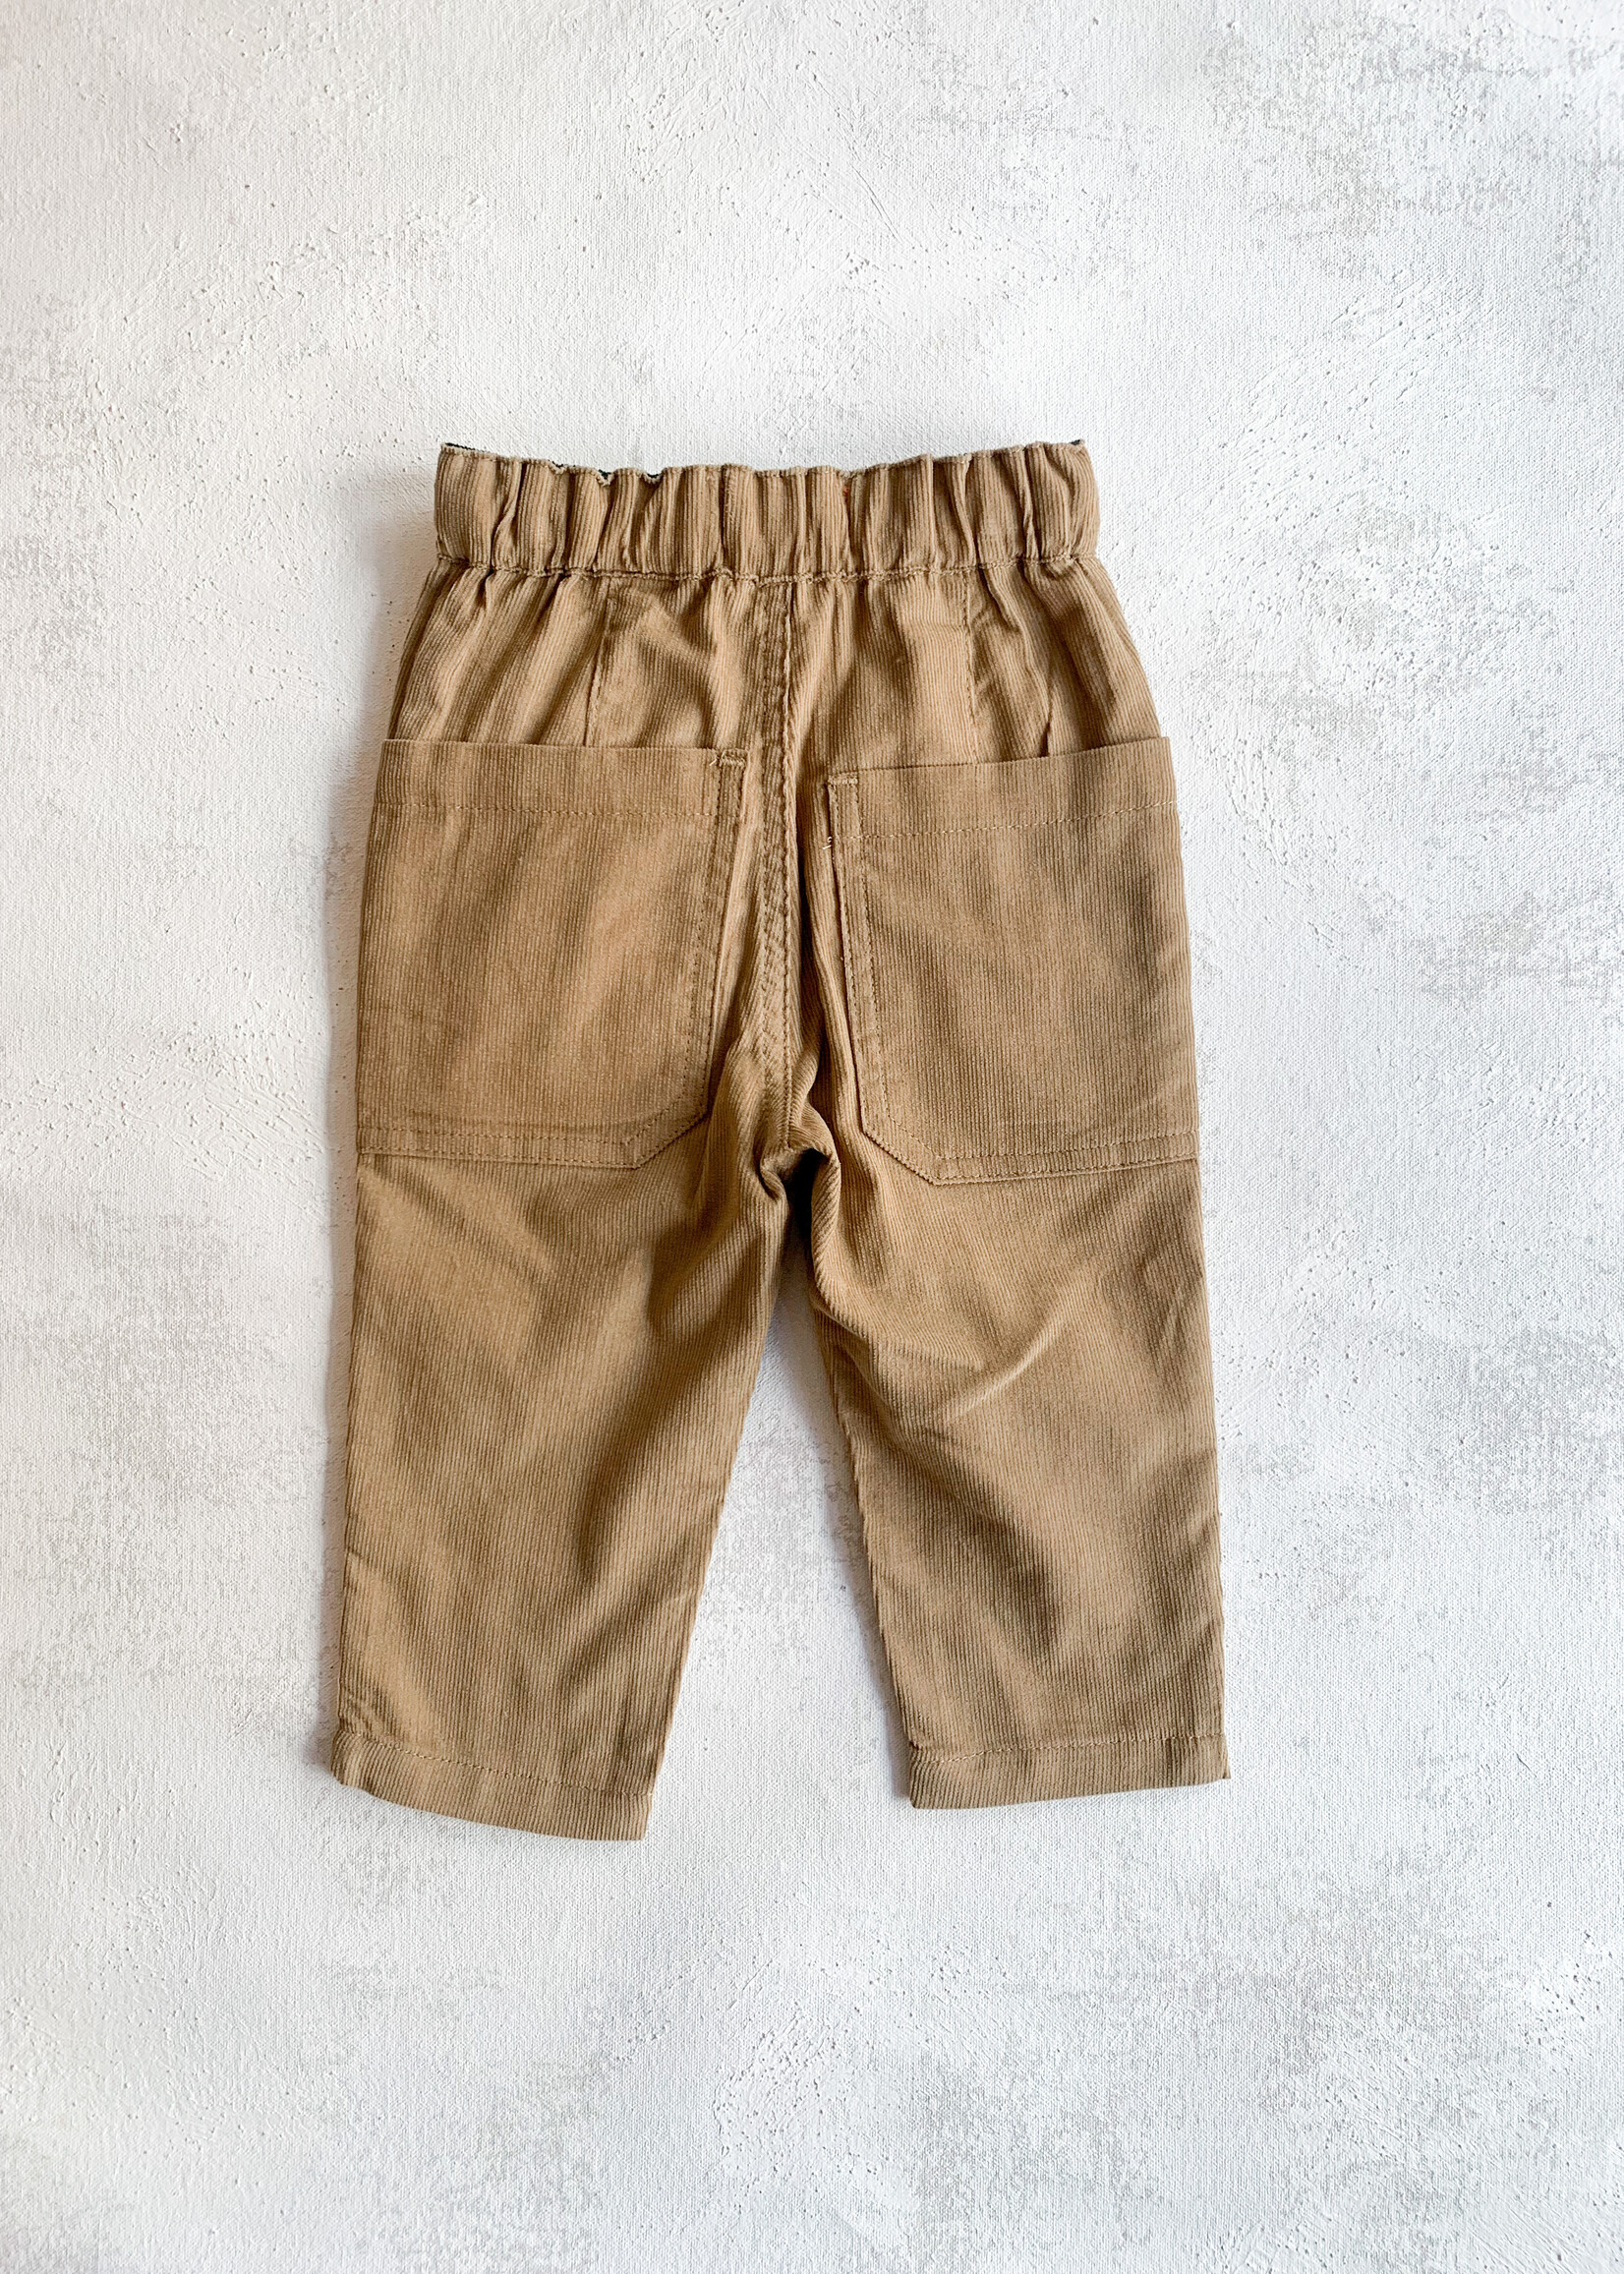 Tally Cord Pants in Brown - Elitaire Boutique